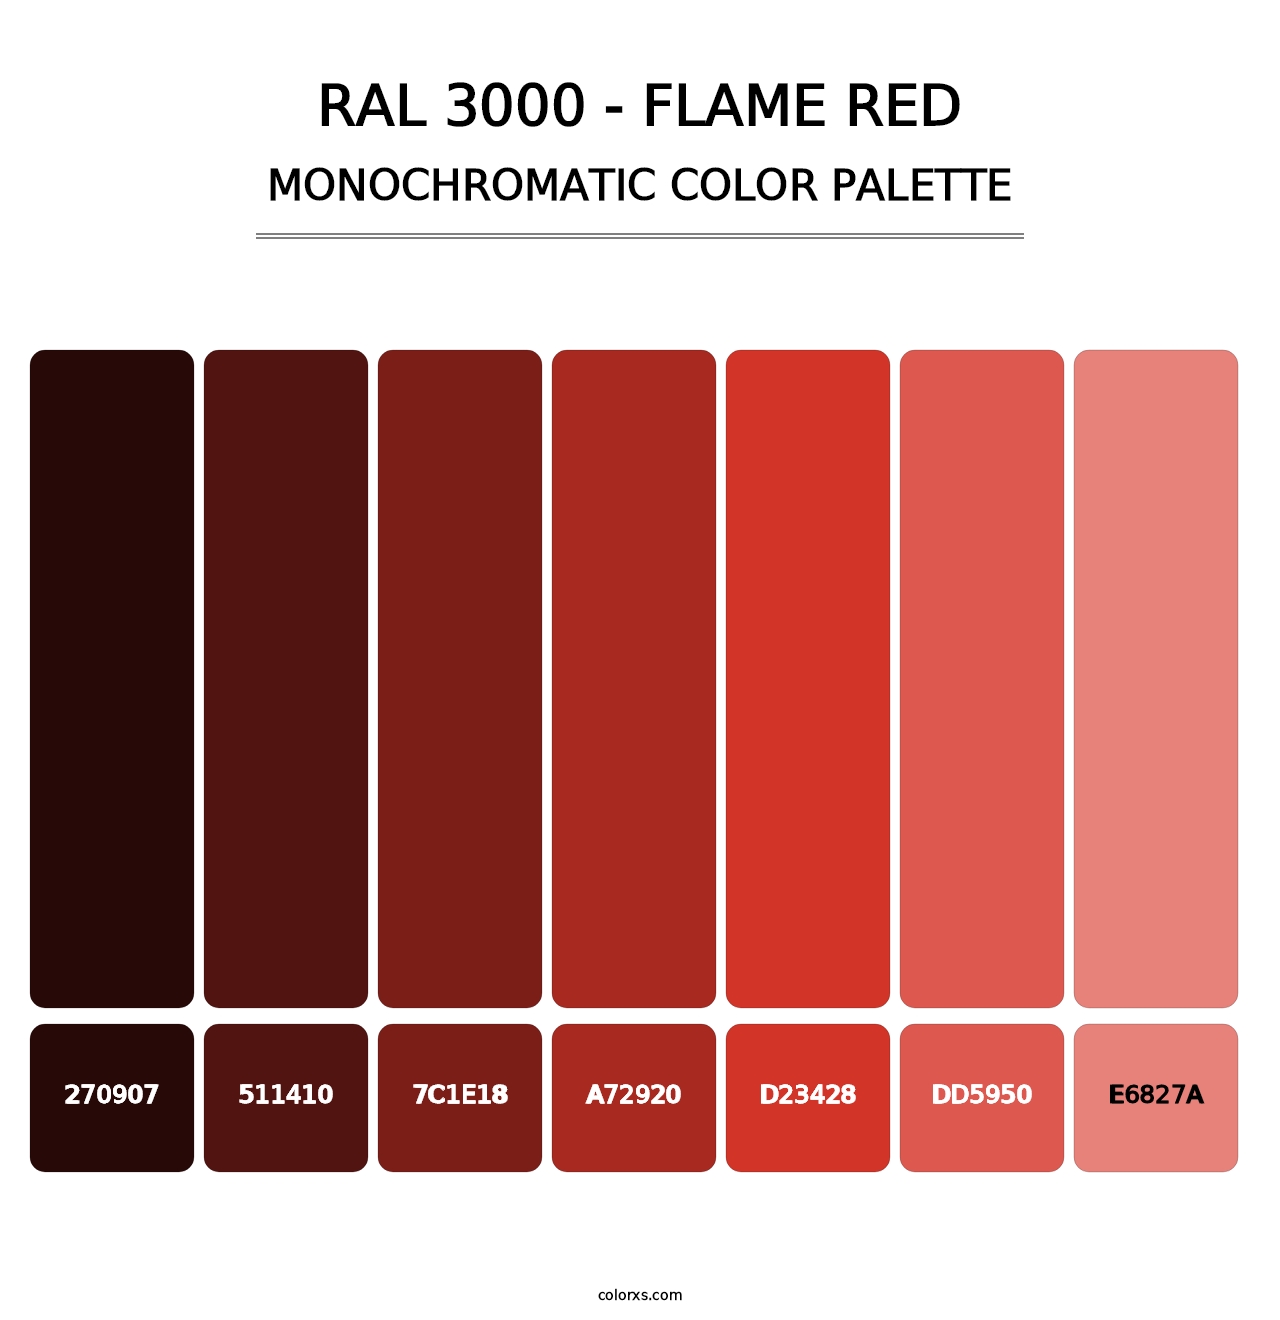 RAL 3000 - Flame Red - Monochromatic Color Palette